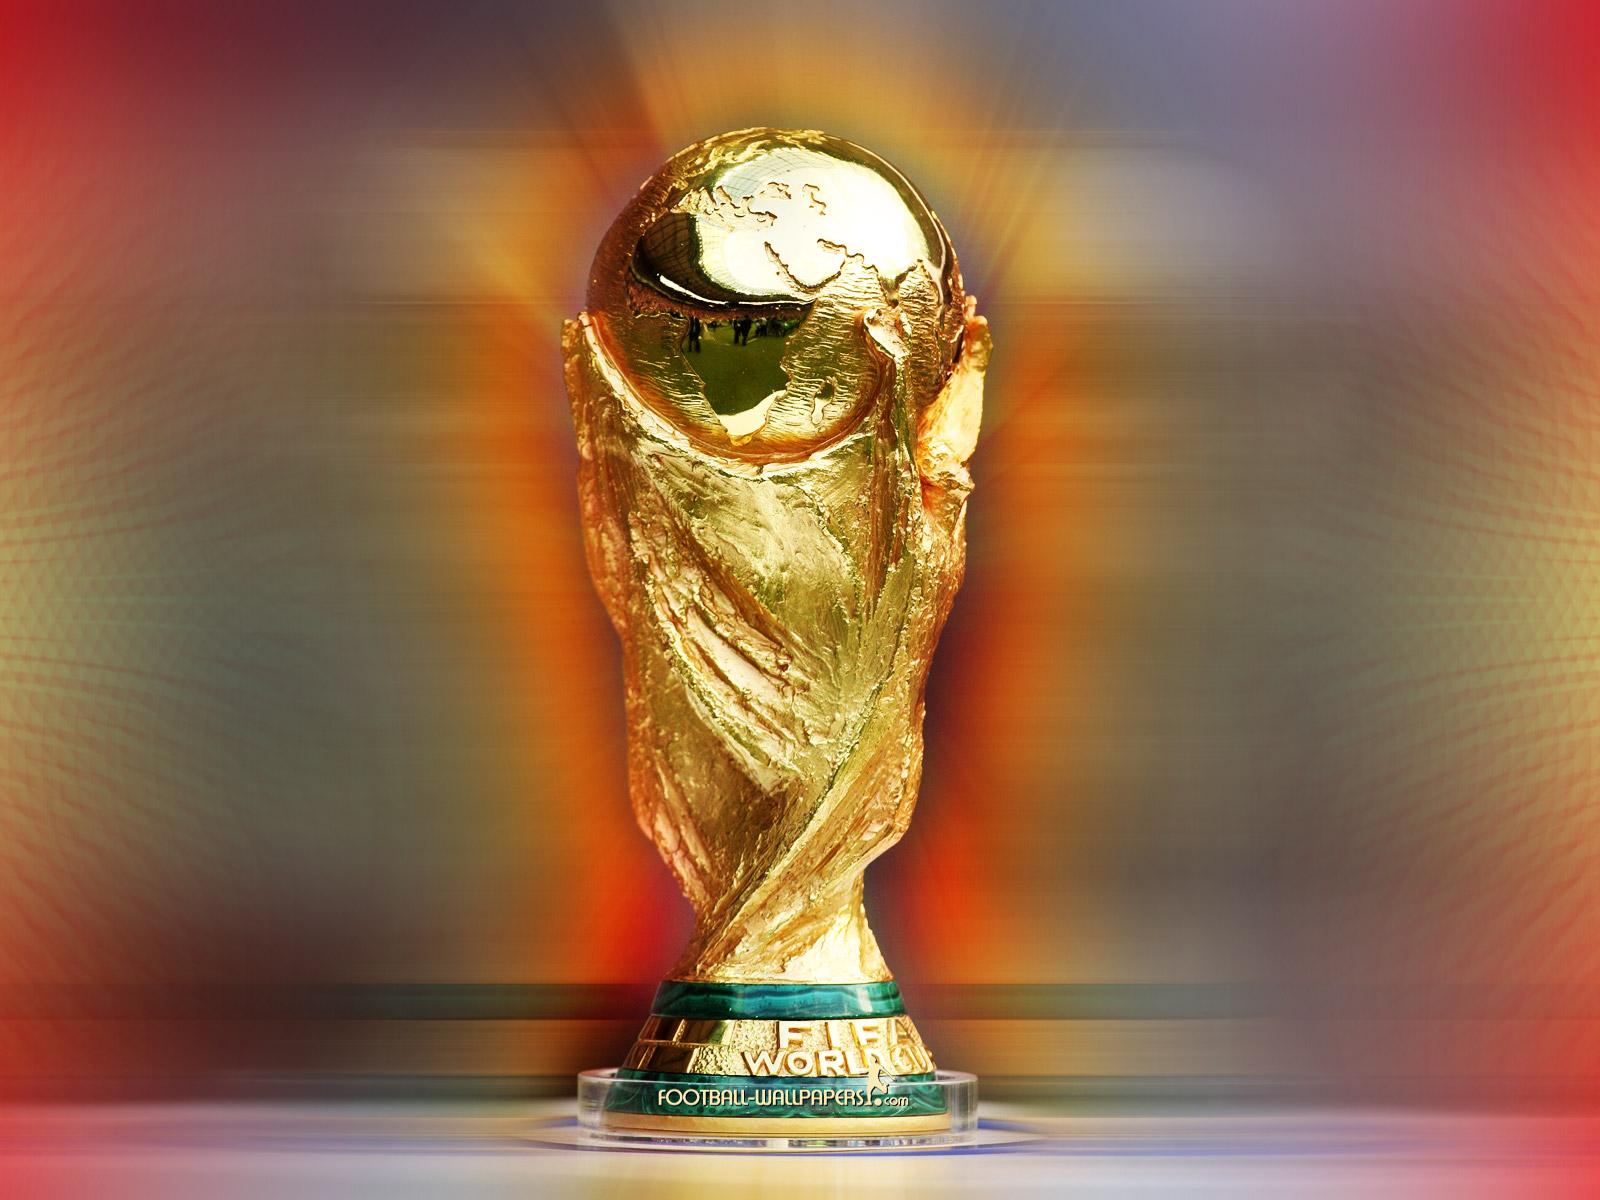 Musings of a Disappointed American on the 2022 World Cup